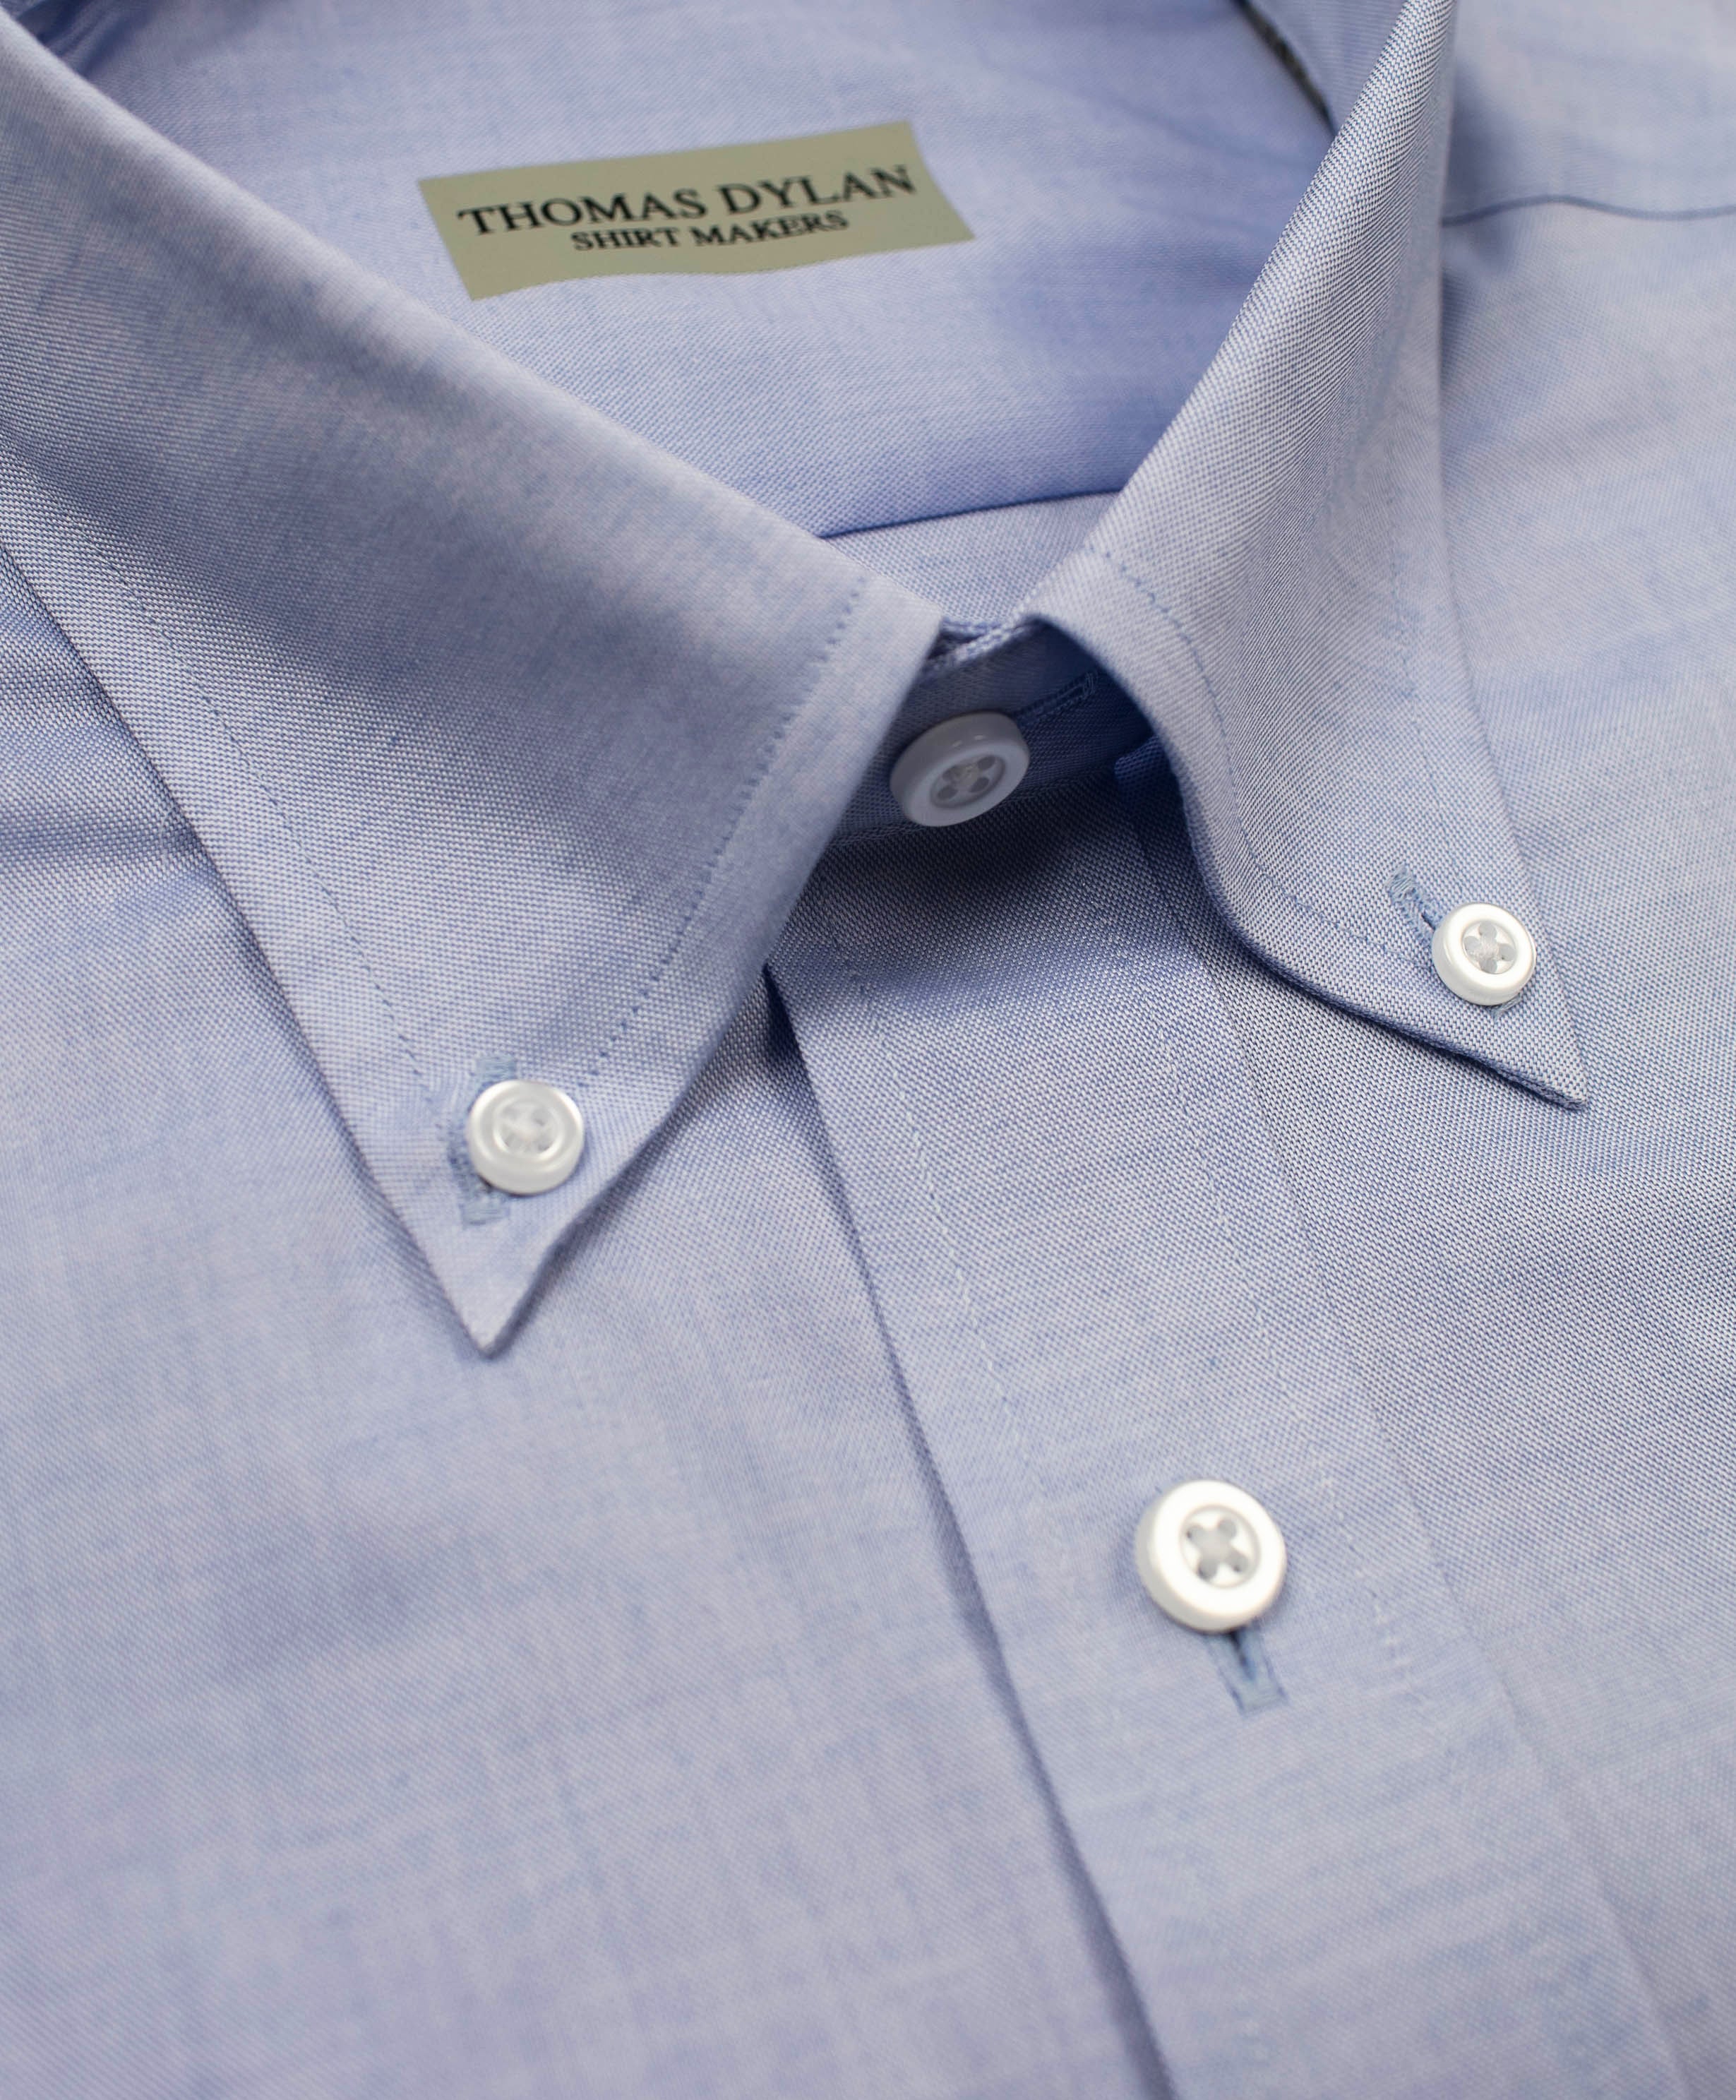 131 TF BD - Thomas Dylan Blue Tailored Fit Button Down Collar